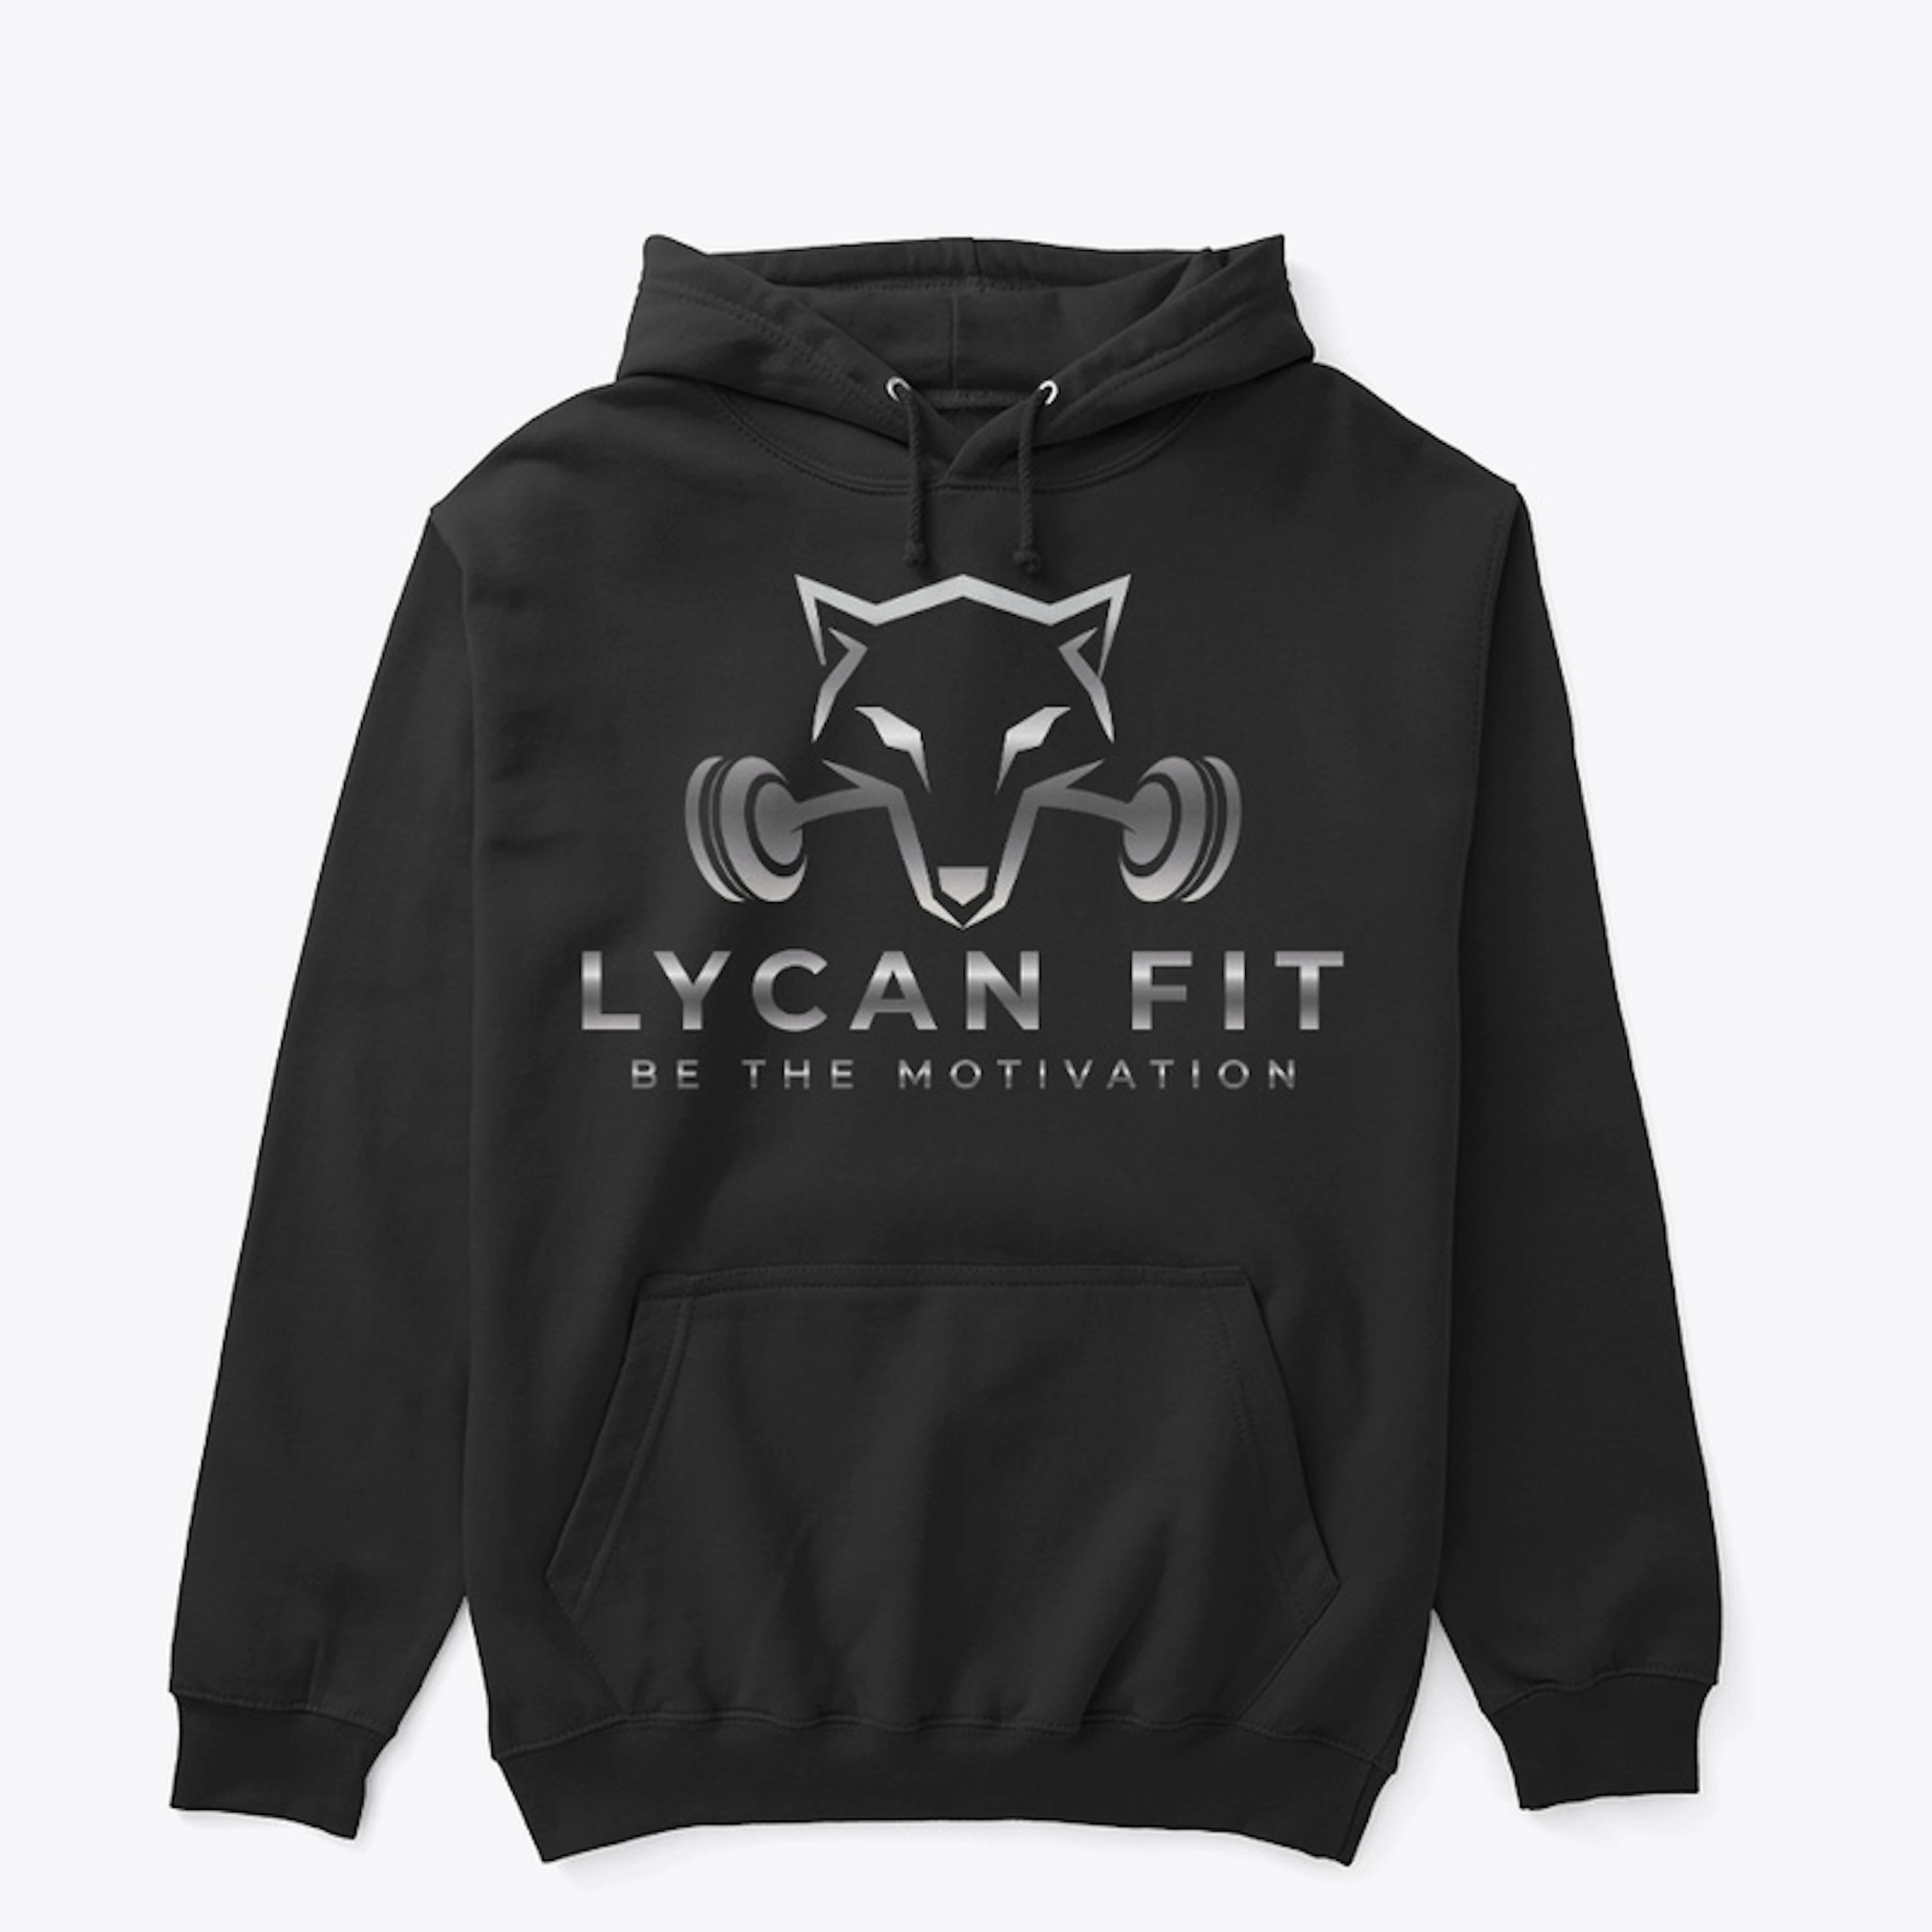 Lycan Fit active wear and acessories